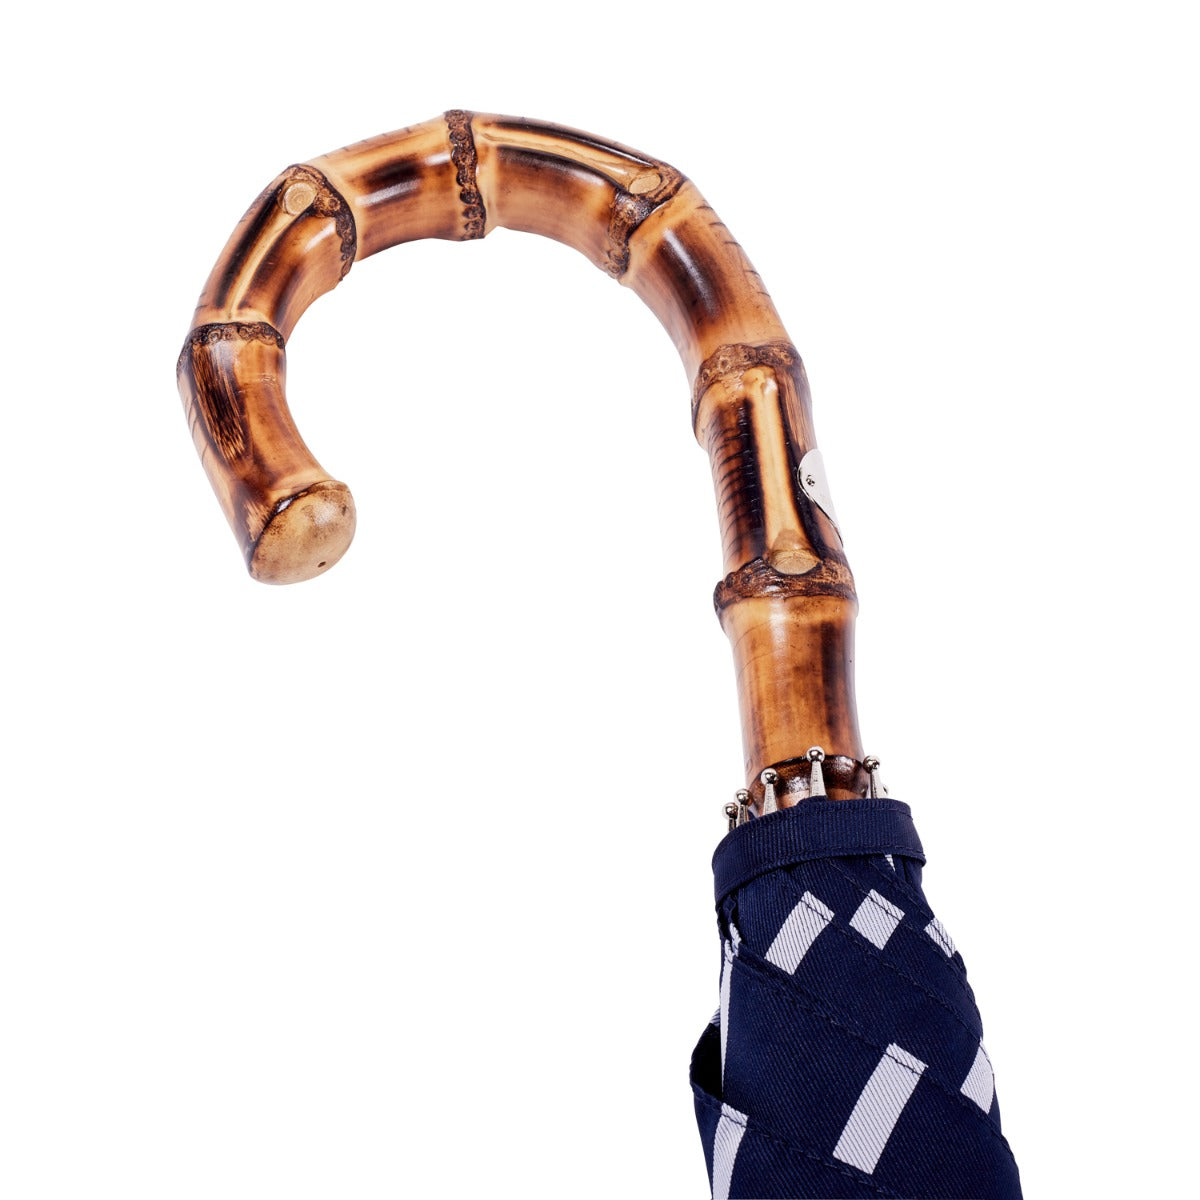 A Navy Pin Stripe umbrella with a bamboo handle featuring an Italian design from KirbyAllison.com.